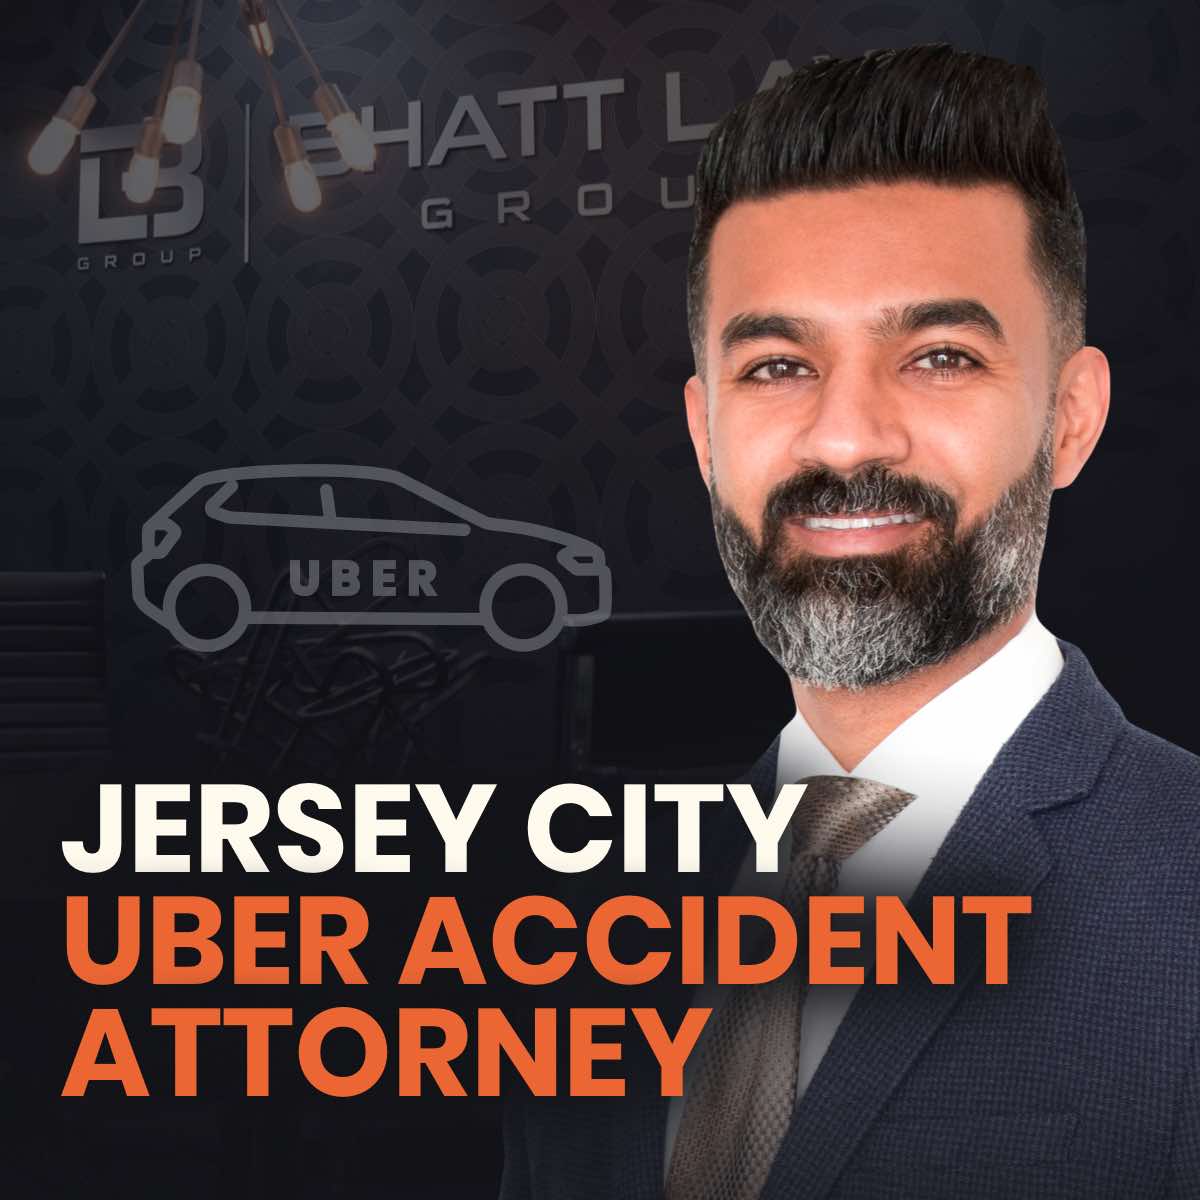 Jersey City Uber Accident Attorney